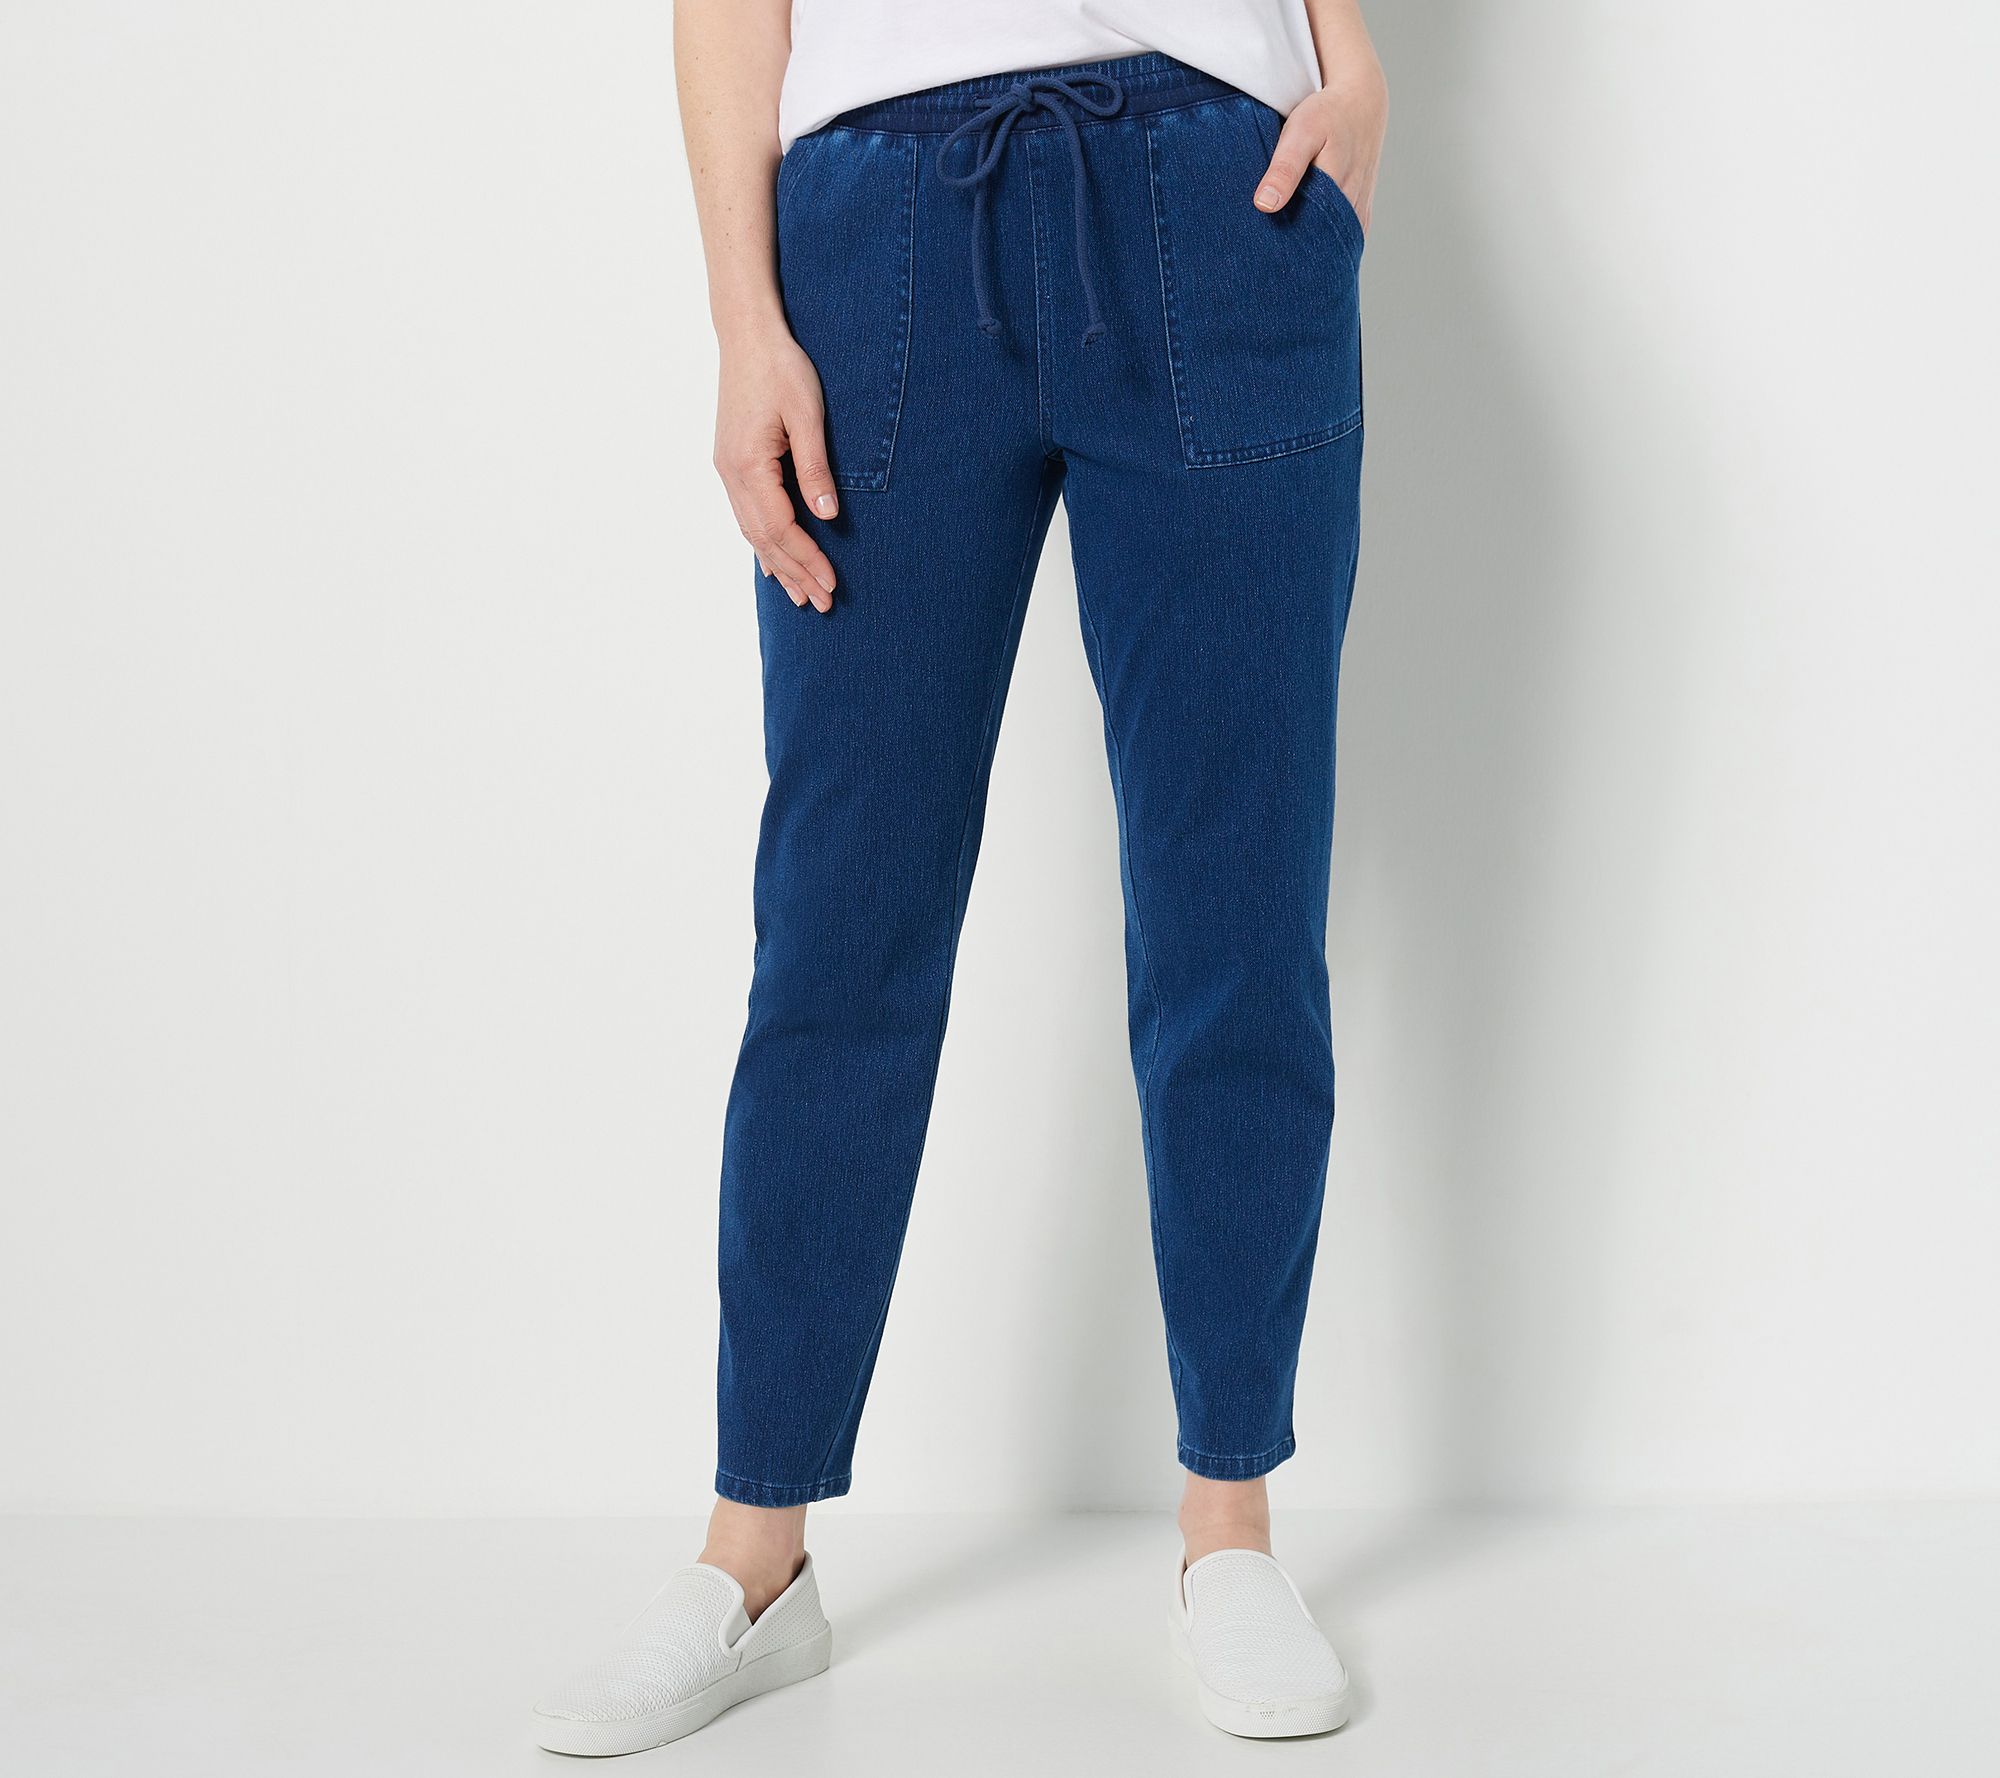 Denim & Co. Active Regulars Duo Stretch Legging with Wide